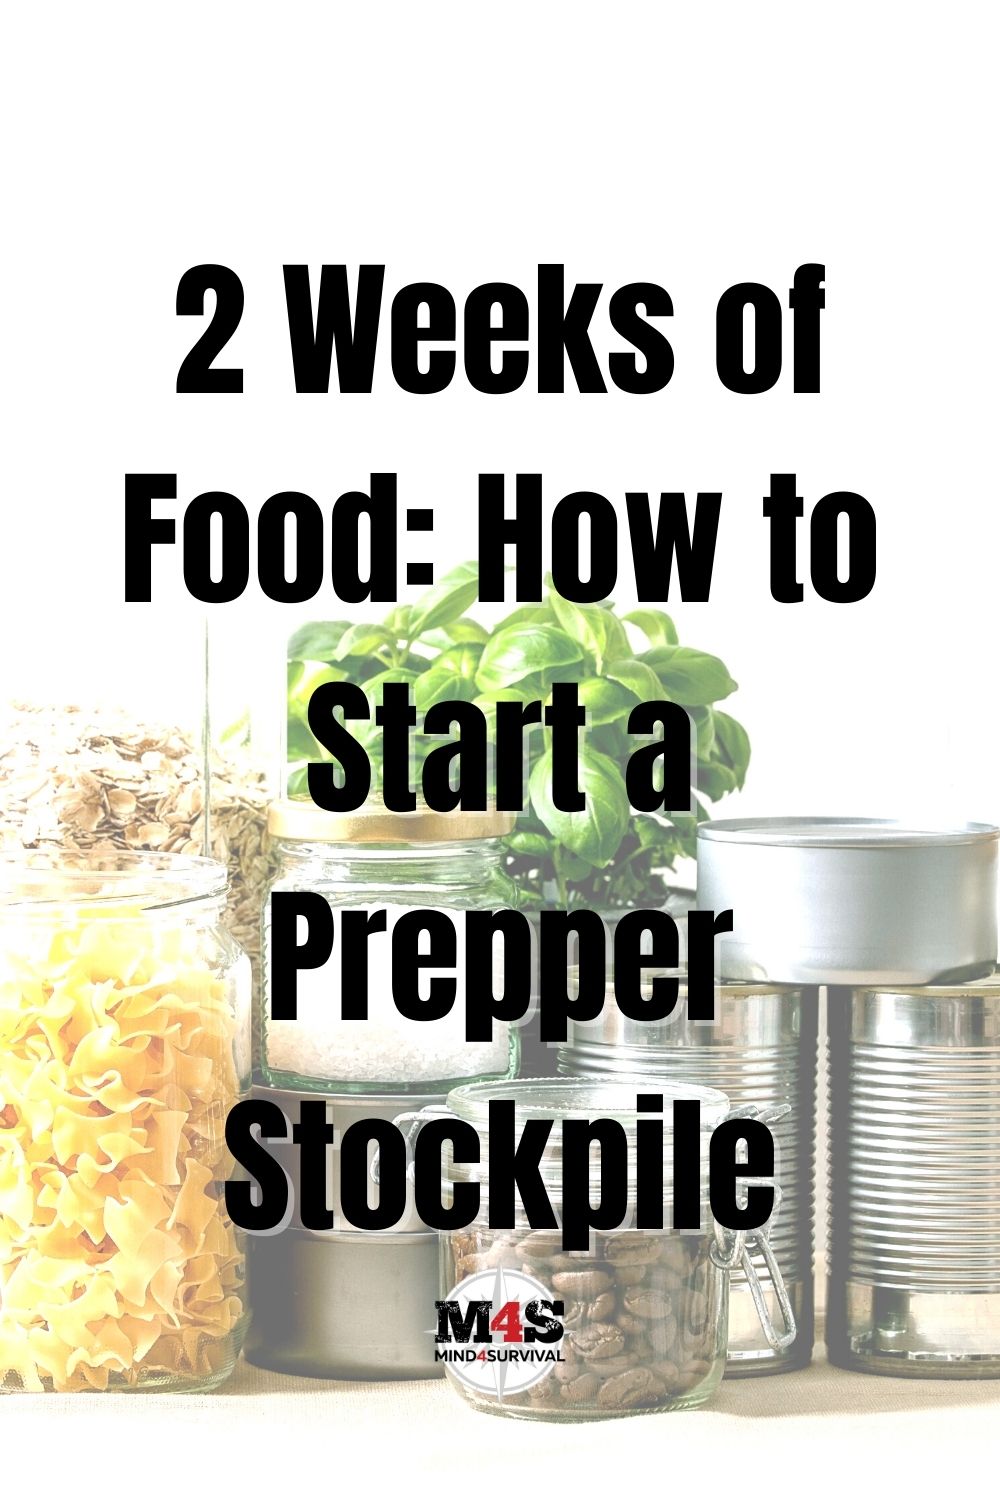 2 Weeks of Food: How to Start a Stockpile for New Preppers